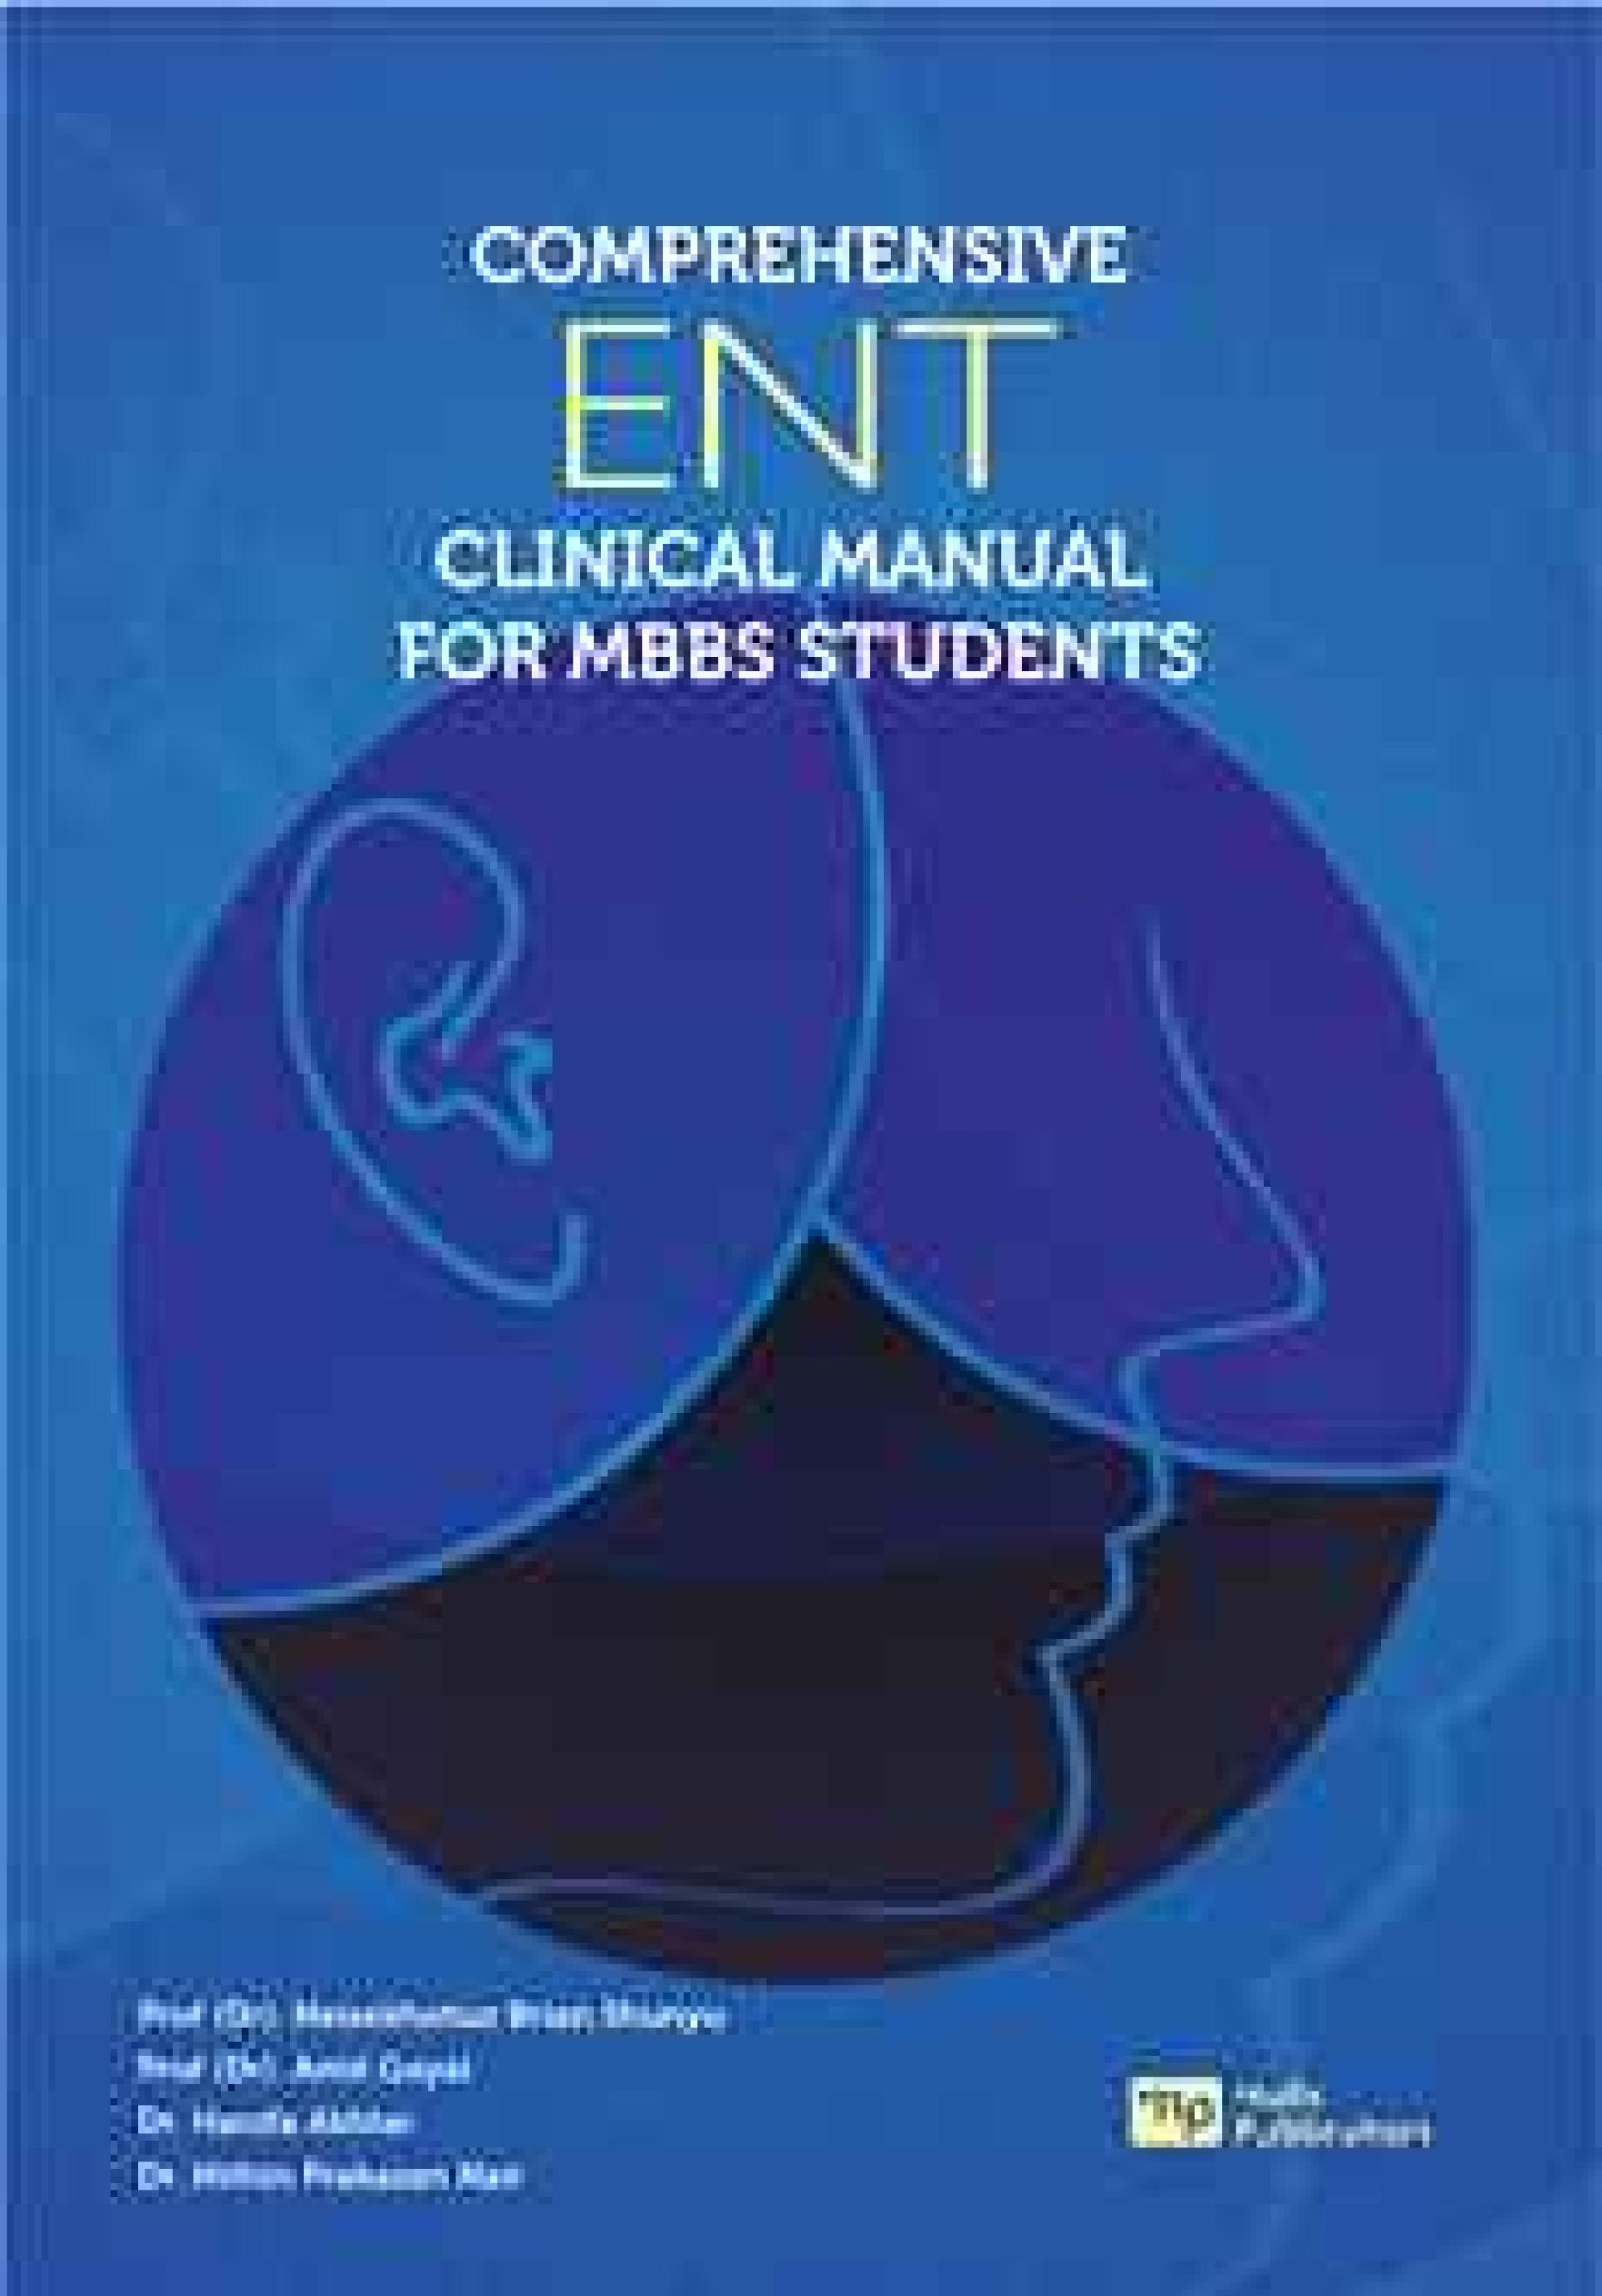 COMPREHENSIVE ENT CLINICAL MANUAL FOR MBBS STUDENTS